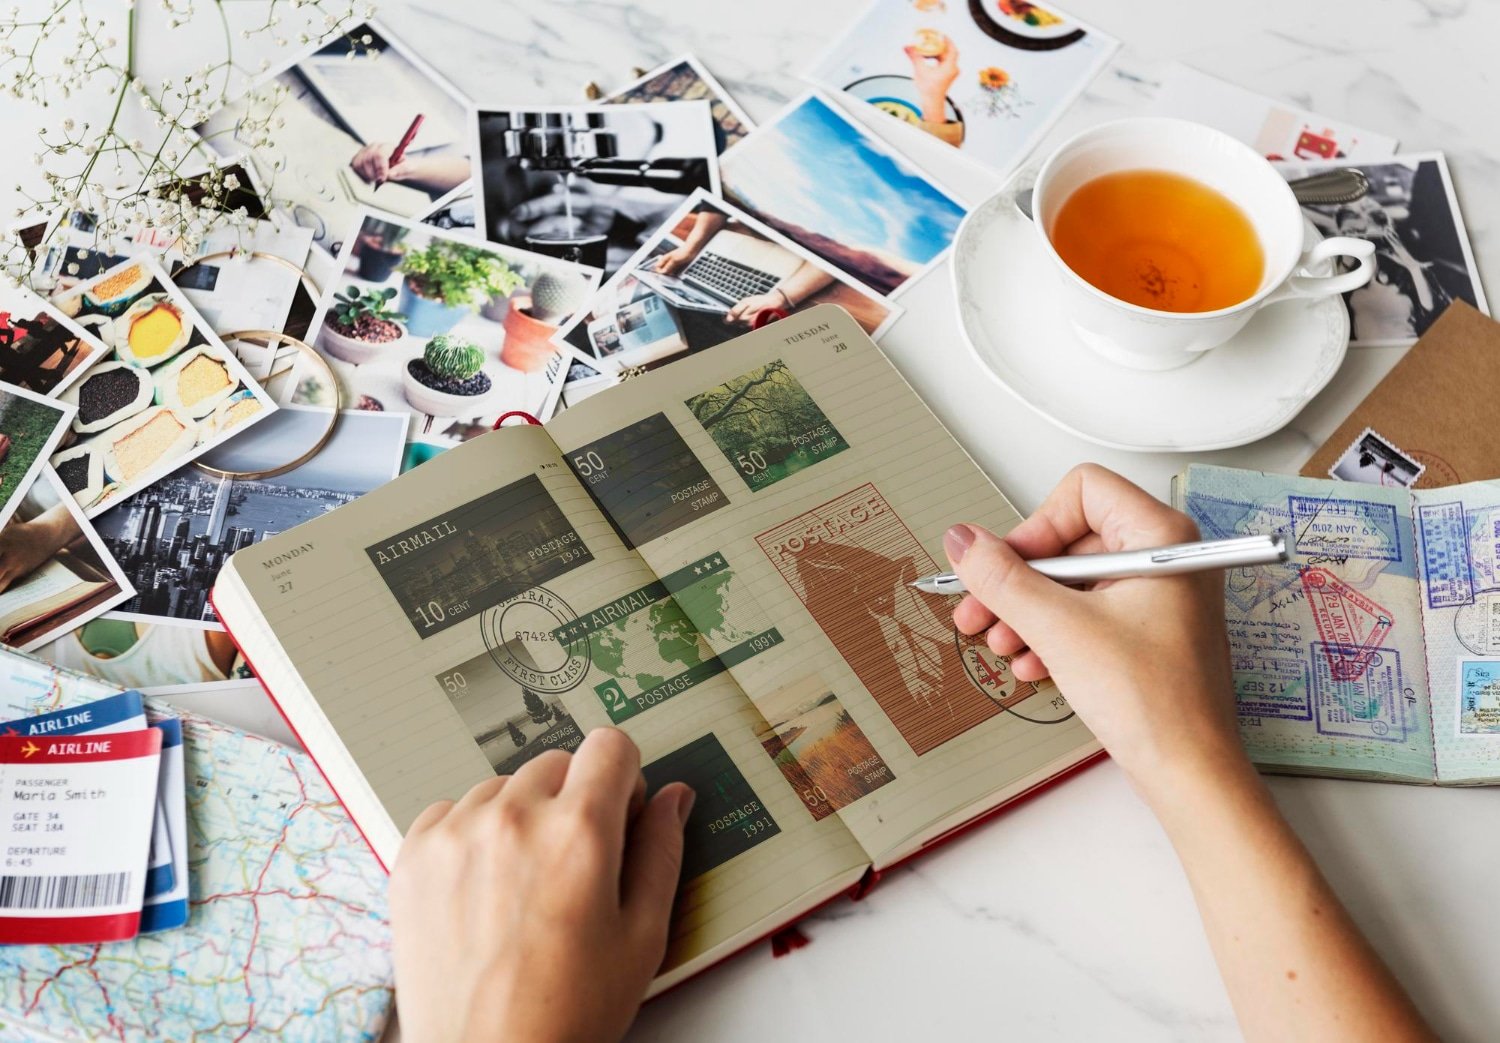 Capture Memories With Promptly Journals’ Thoughtful Keepsakes